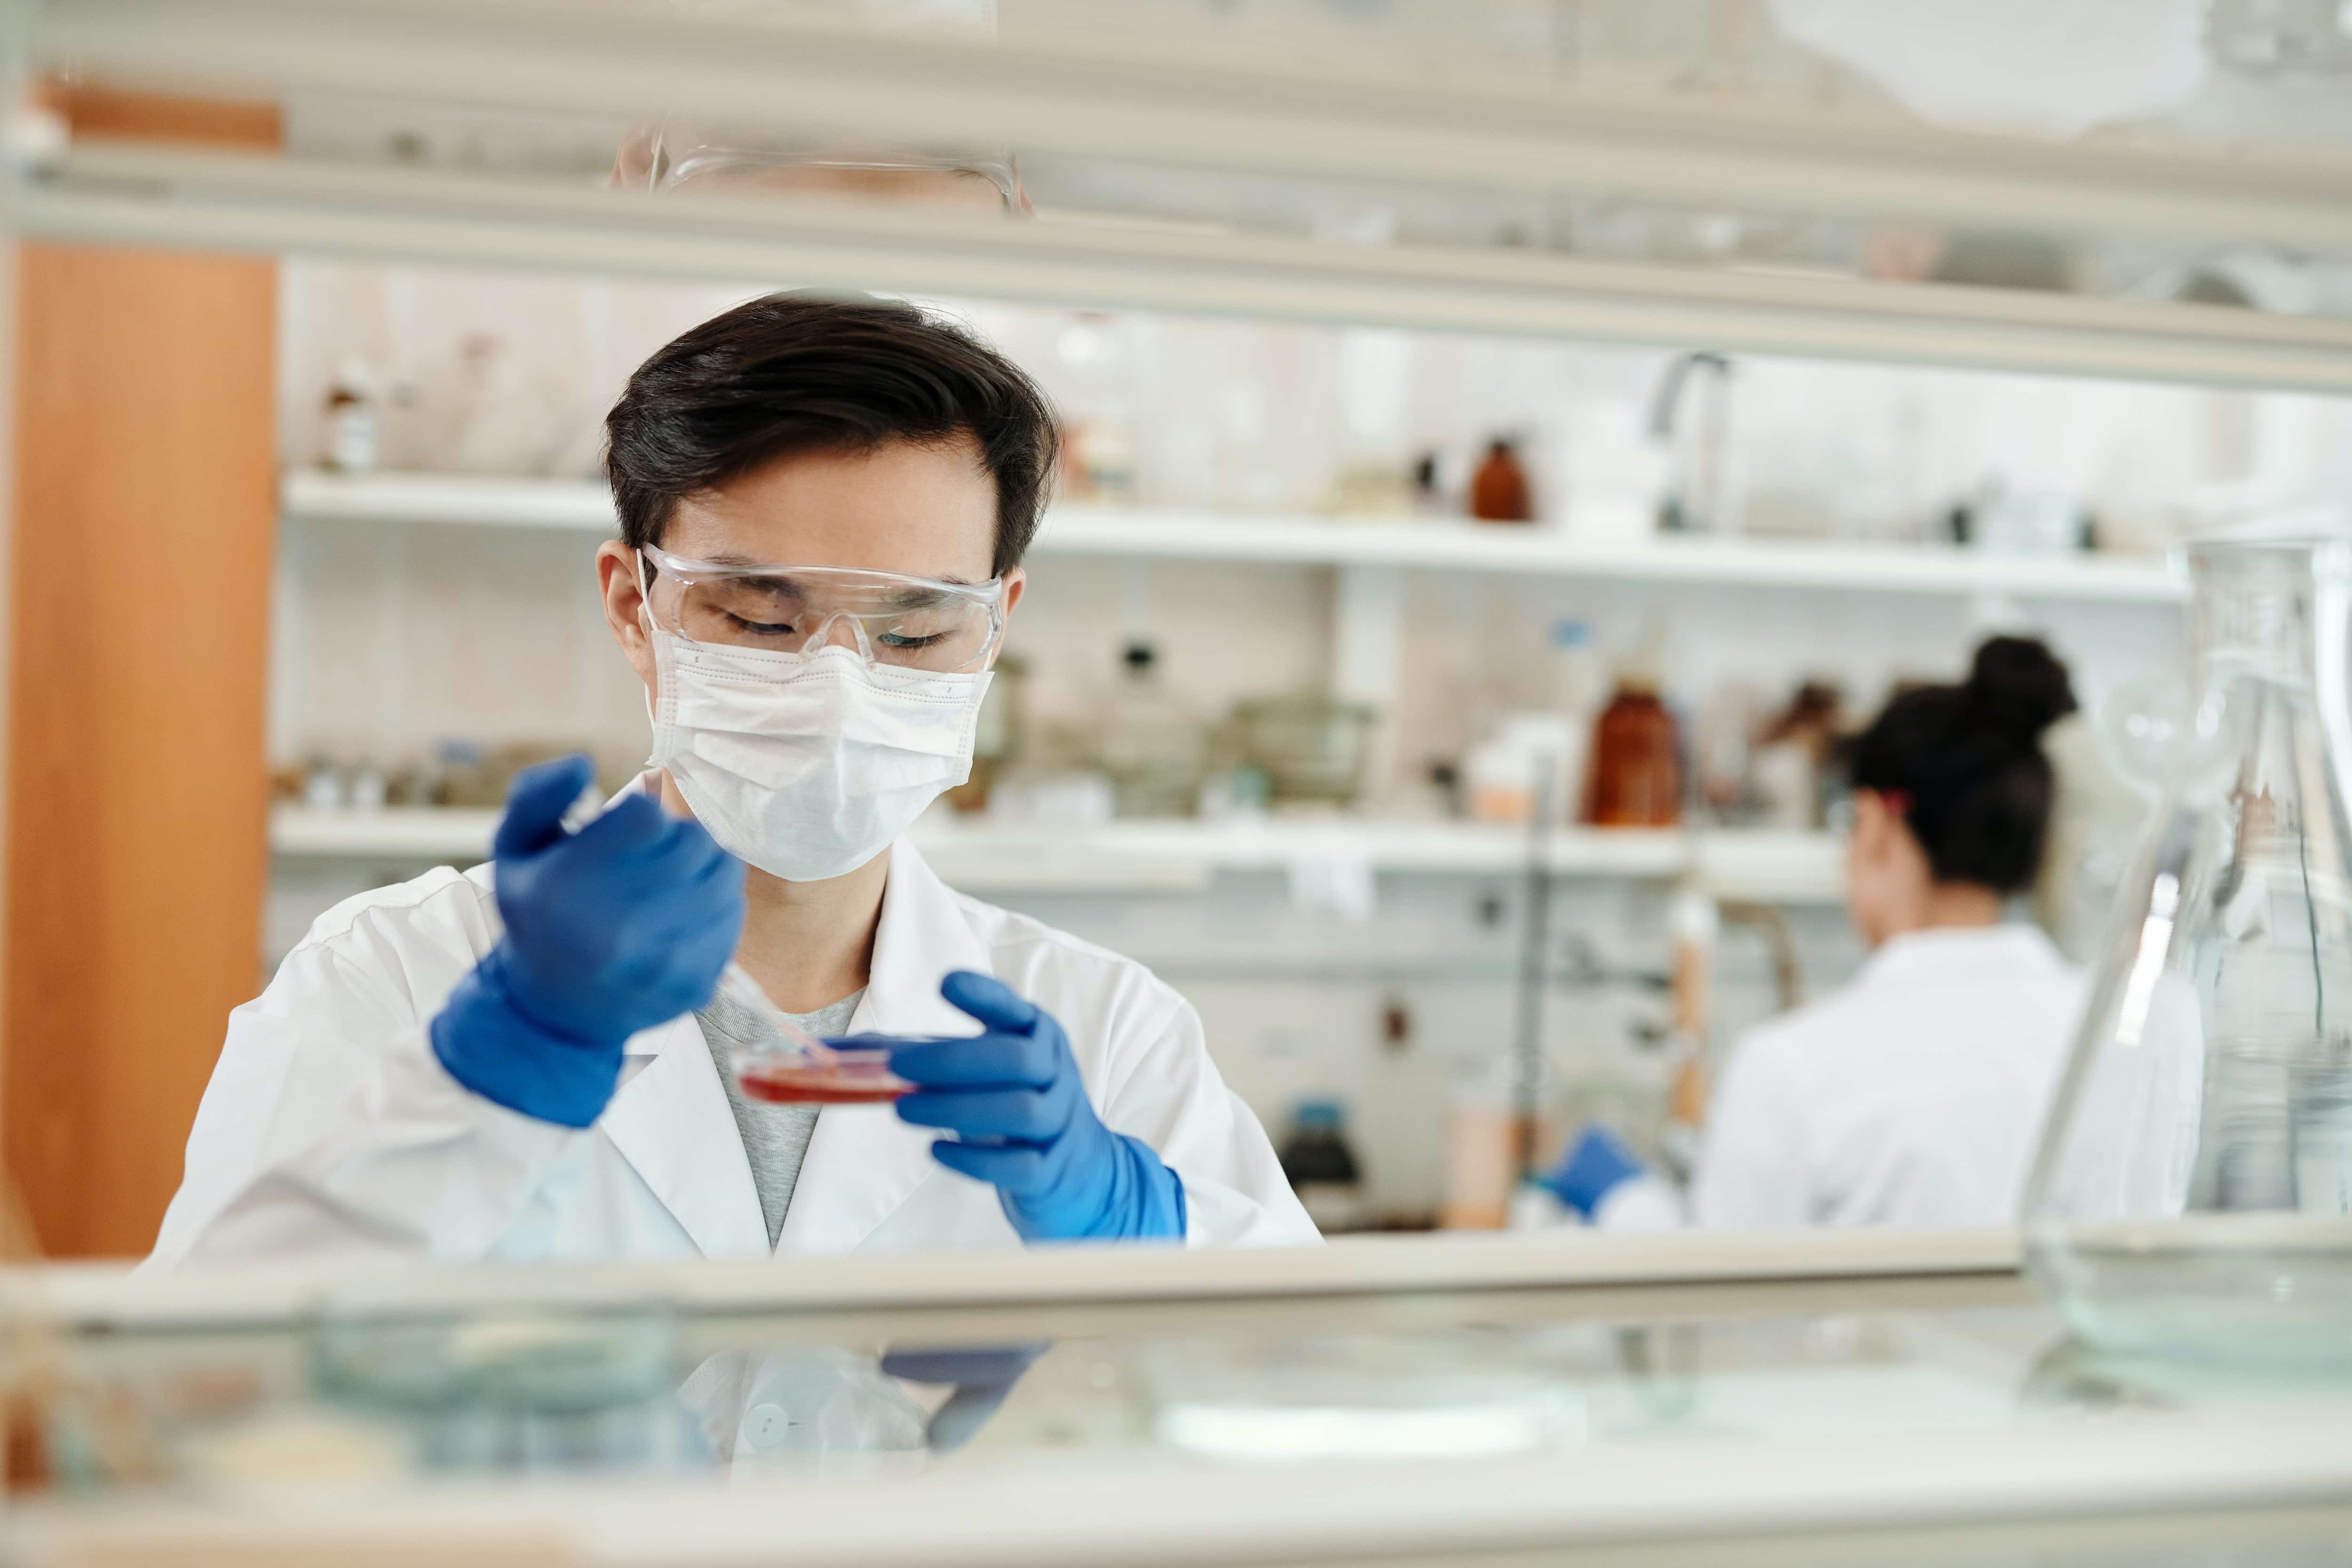 This fund is available to provide modest financial support for benchwork. The emphasis is on methodology, with a preference for cellular or bioanalytical work. 